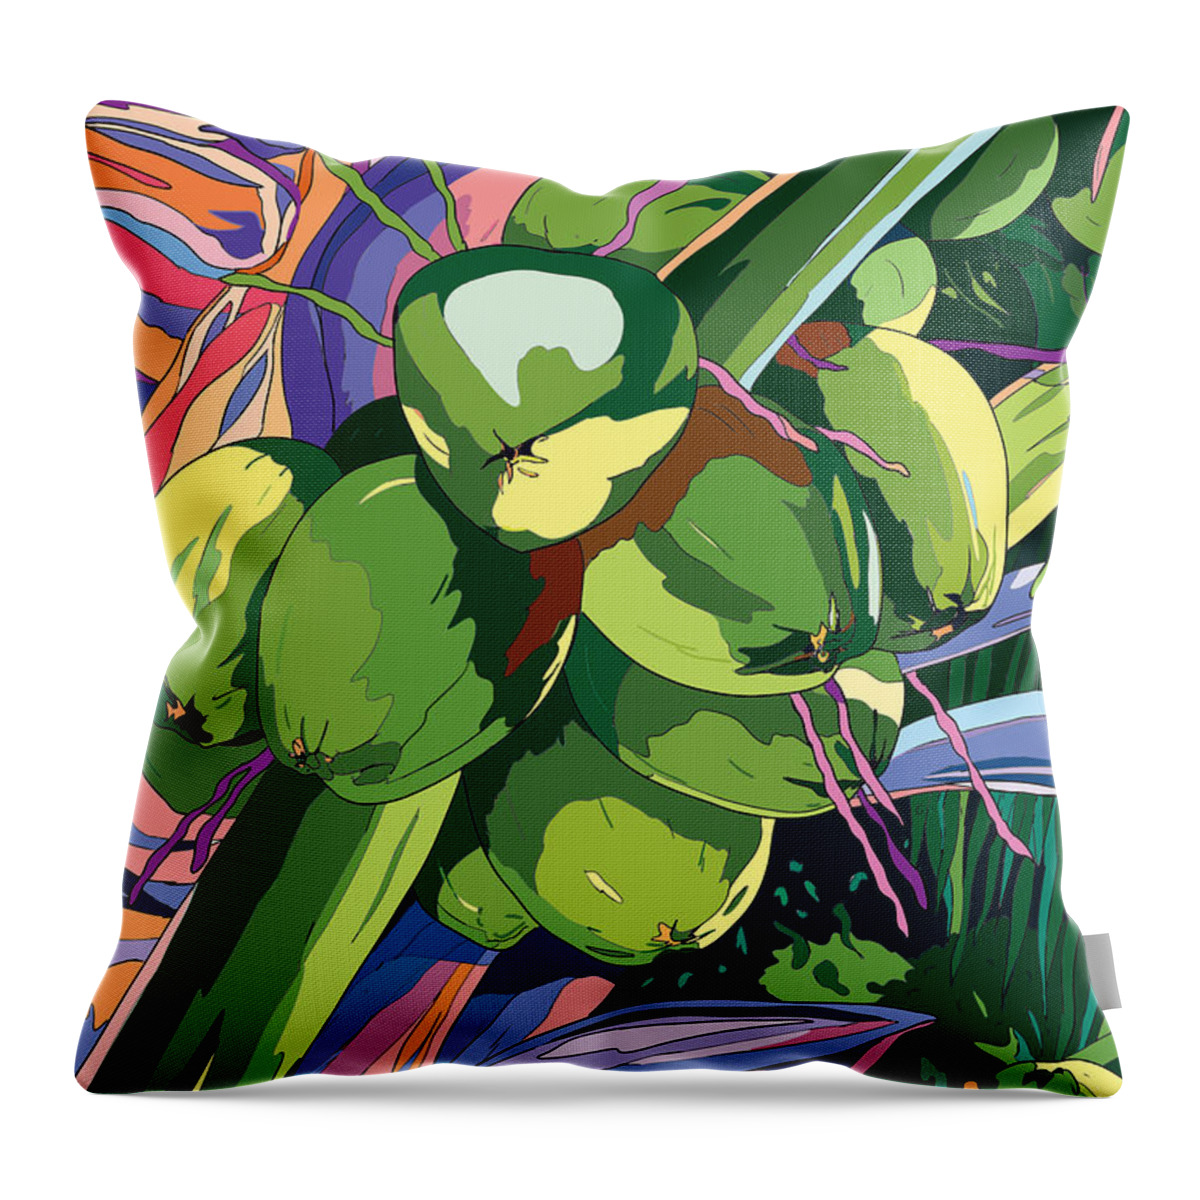 Coconuts Throw Pillow featuring the digital art Coconuts #1 by John Clark